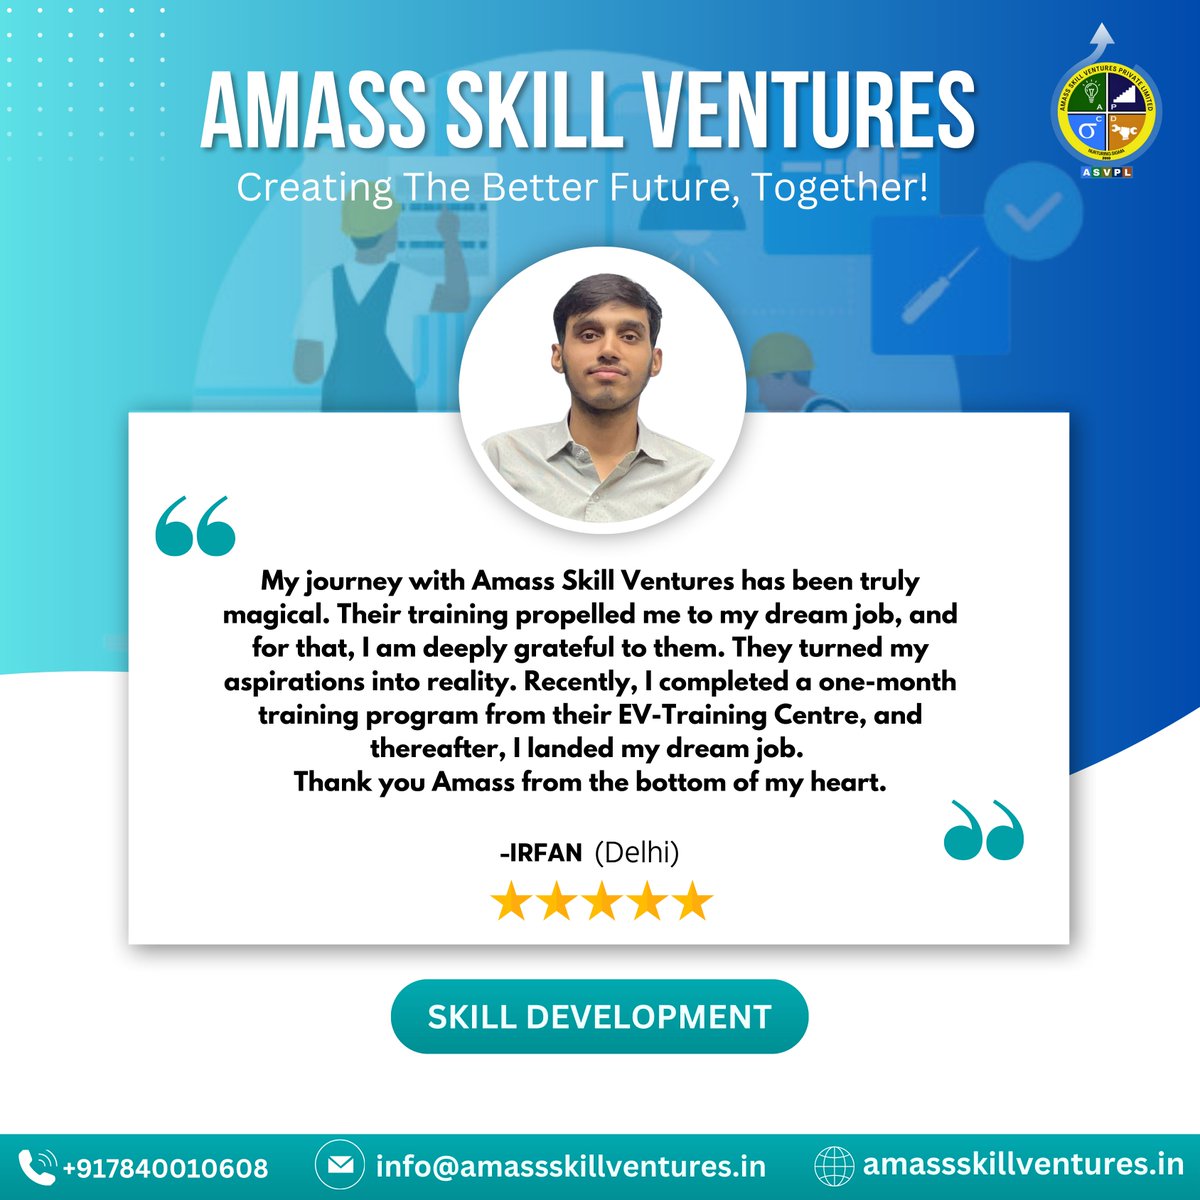 Transform your career with Amass Skill Ventures! 🚀 Our training programs make dreams come true. Join us now! #AmassSkillVentures #CareerTransformation #DreamJob
#AmassSkillVentures #CareerTransformation #DreamJob #TrainingPrograms #CareerDevelopment #SuccessStory